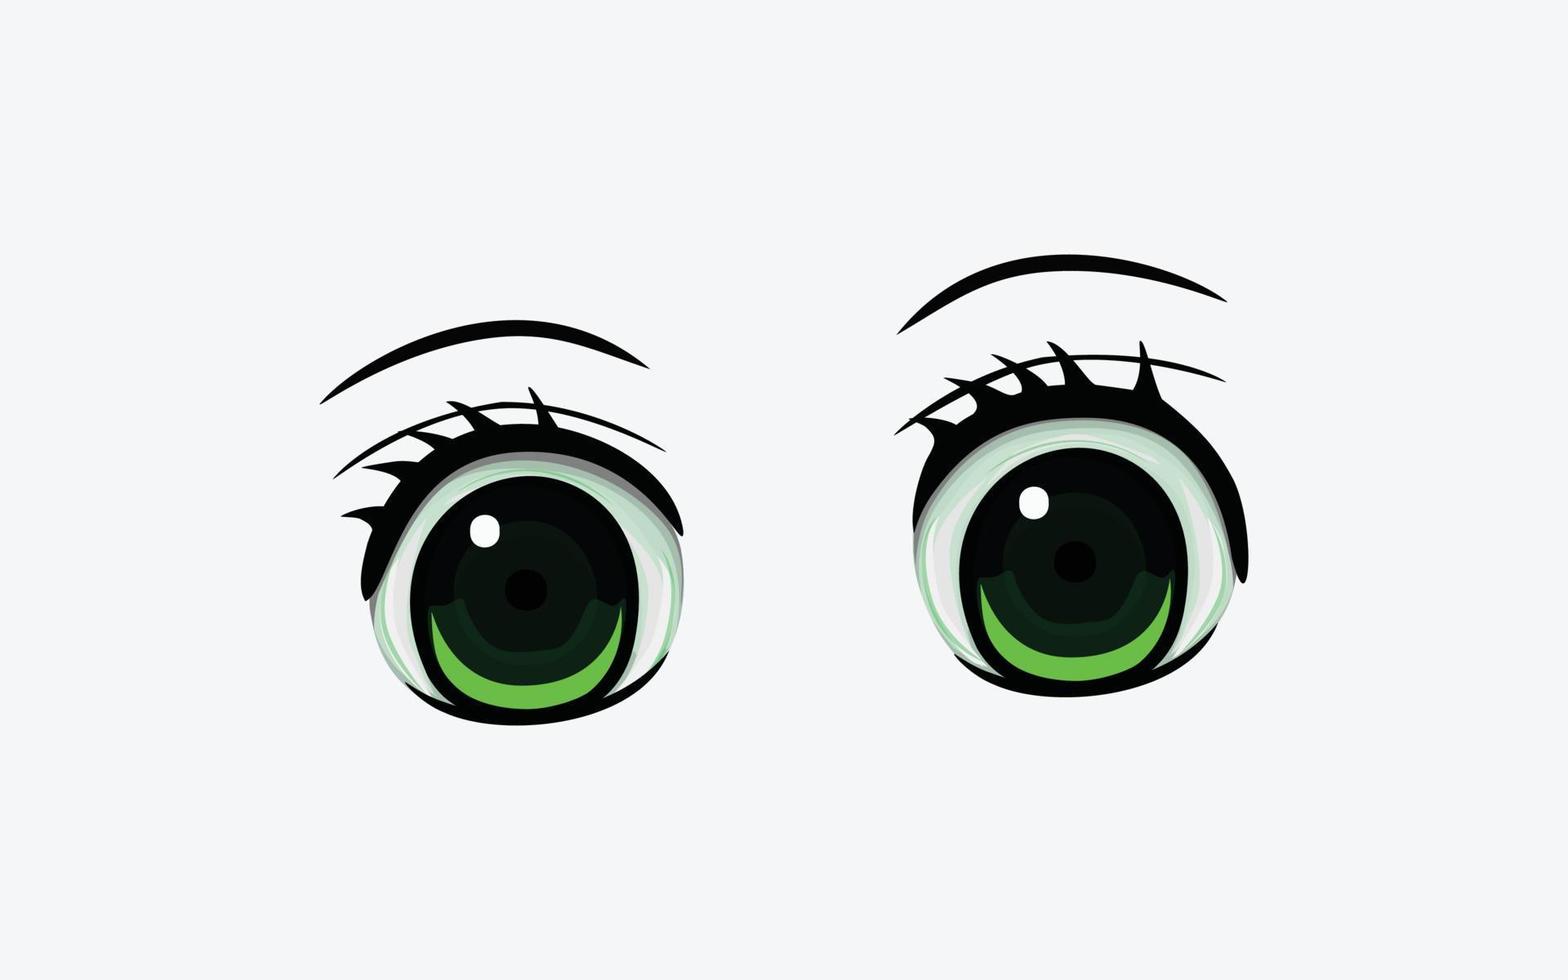 vectors of eye expression in anime style